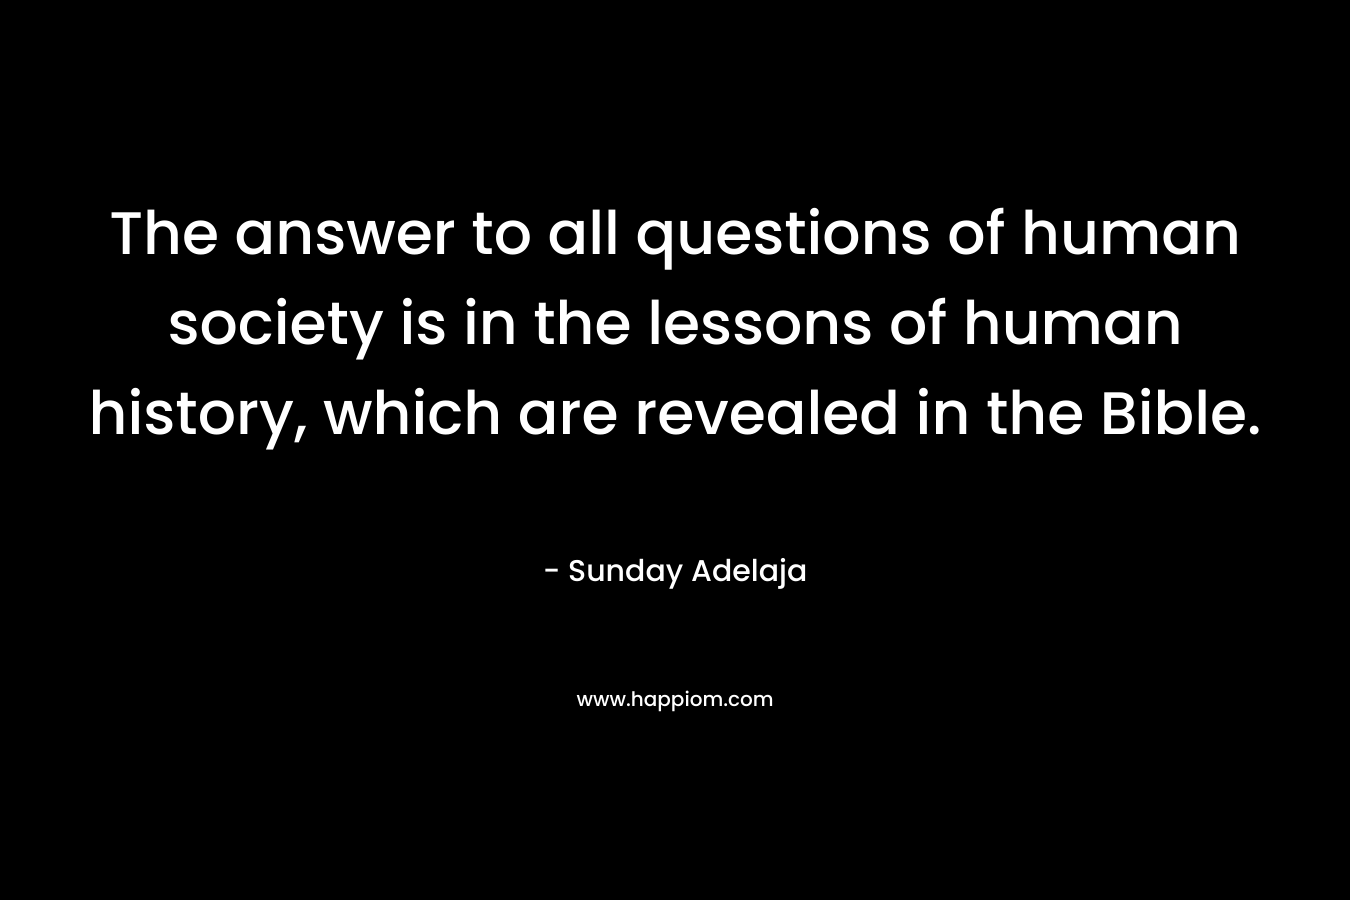 The answer to all questions of human society is in the lessons of human history, which are revealed in the Bible. – Sunday Adelaja